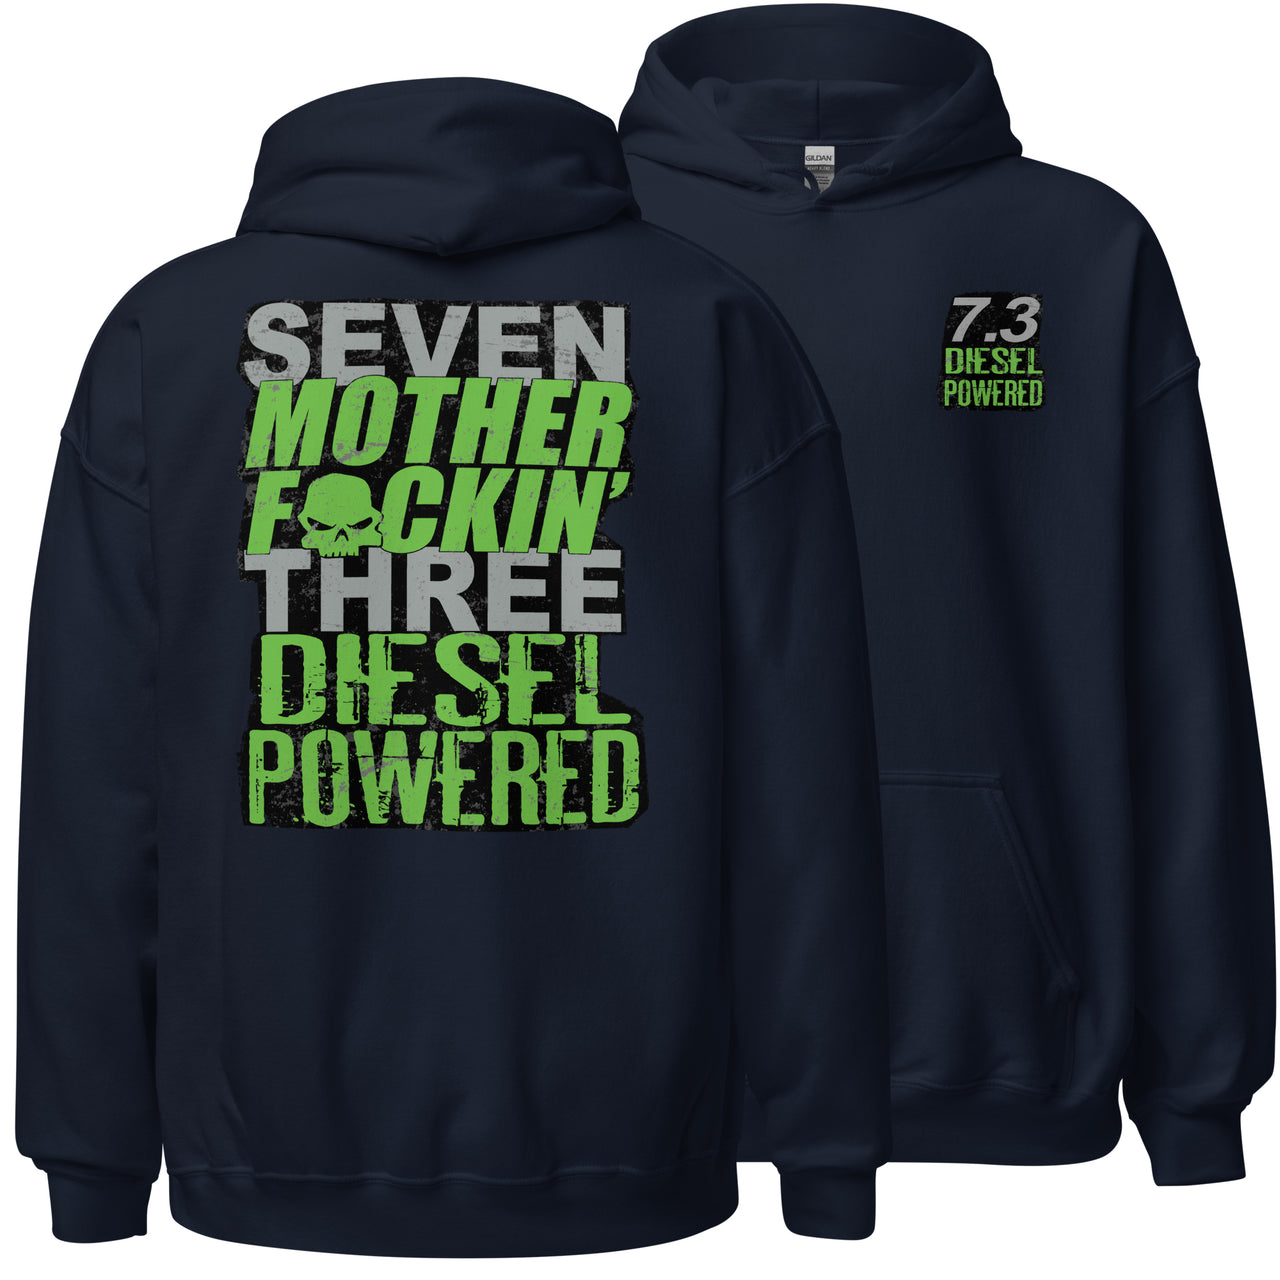 7.3 Power Stroke Hoodie From Aggressive Thread - navy